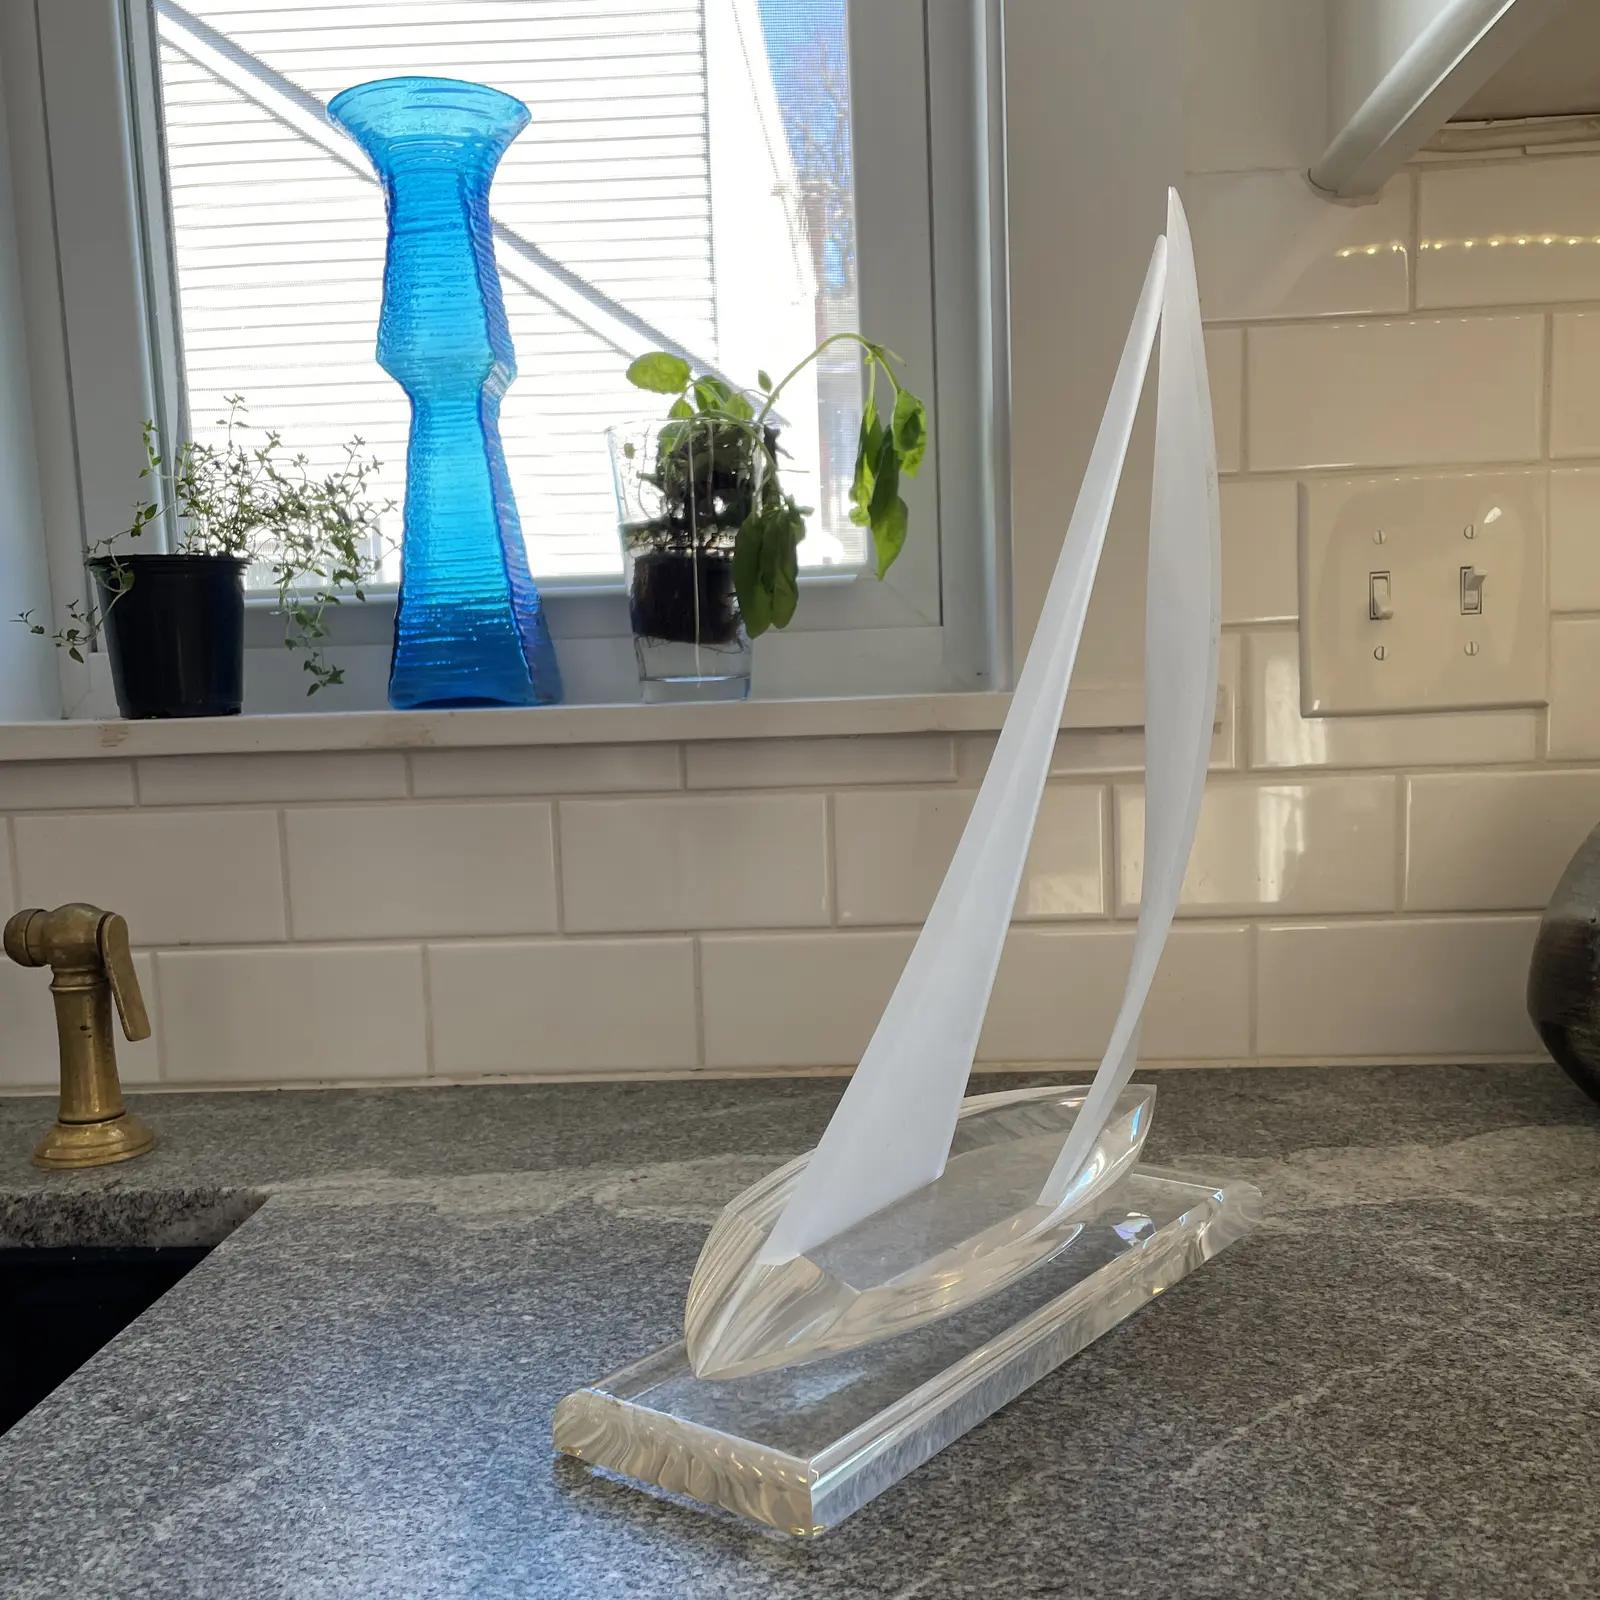 Vintage Mid-20th Century Lucite Sailboat Sculpture In Good Condition For Sale In W Allenhurst, NJ